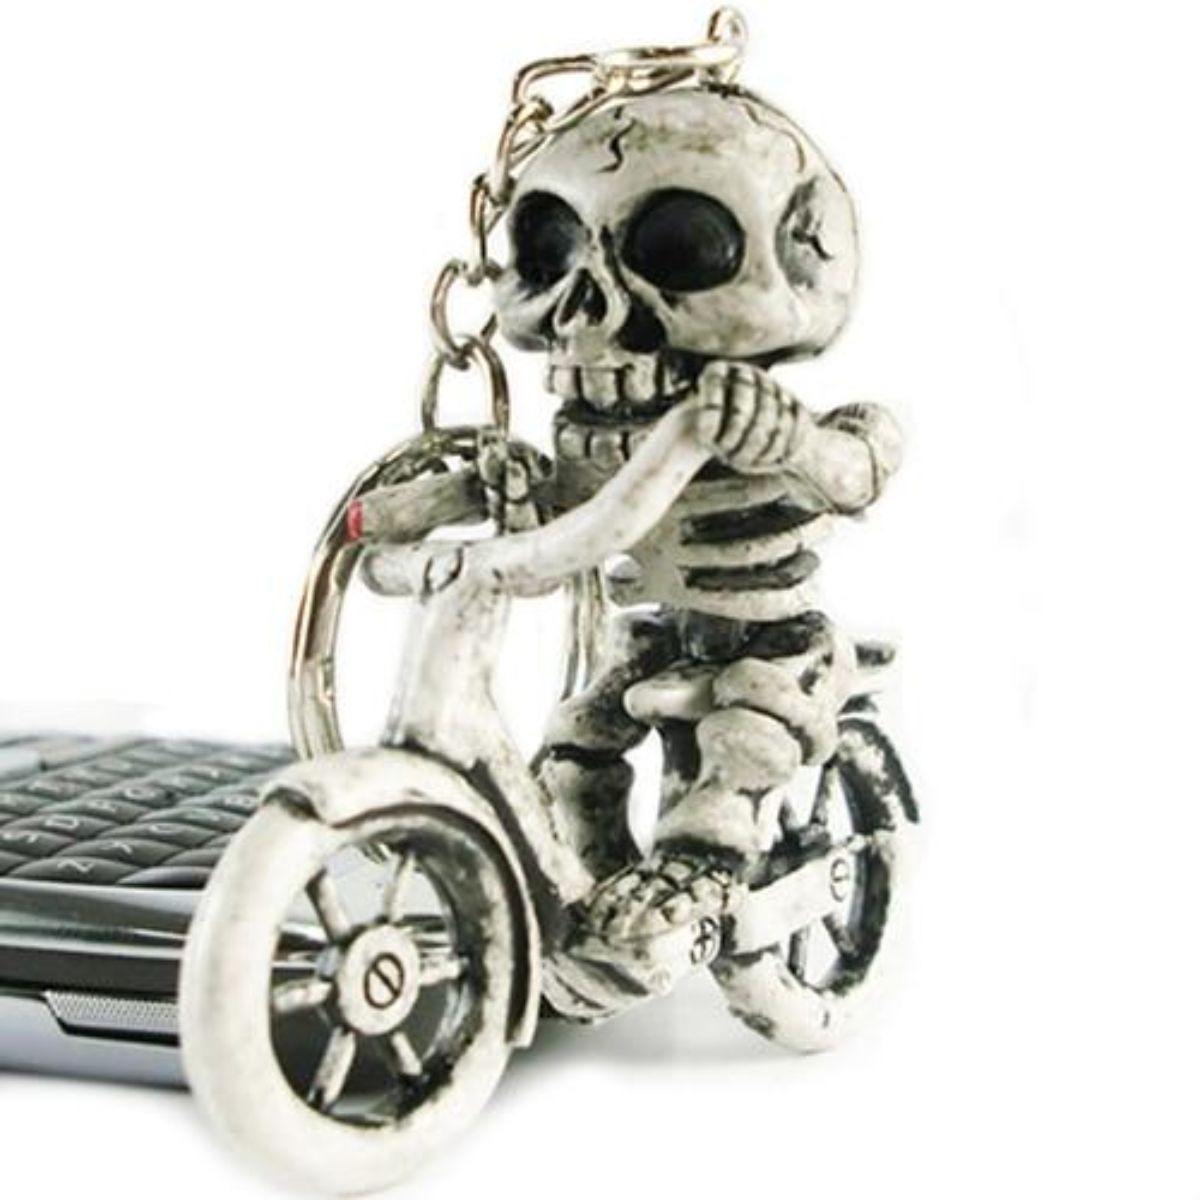 Skeleton on Motorcycle Keychain, Rubber, Stainless Steel Chain, White - American Legend Rider